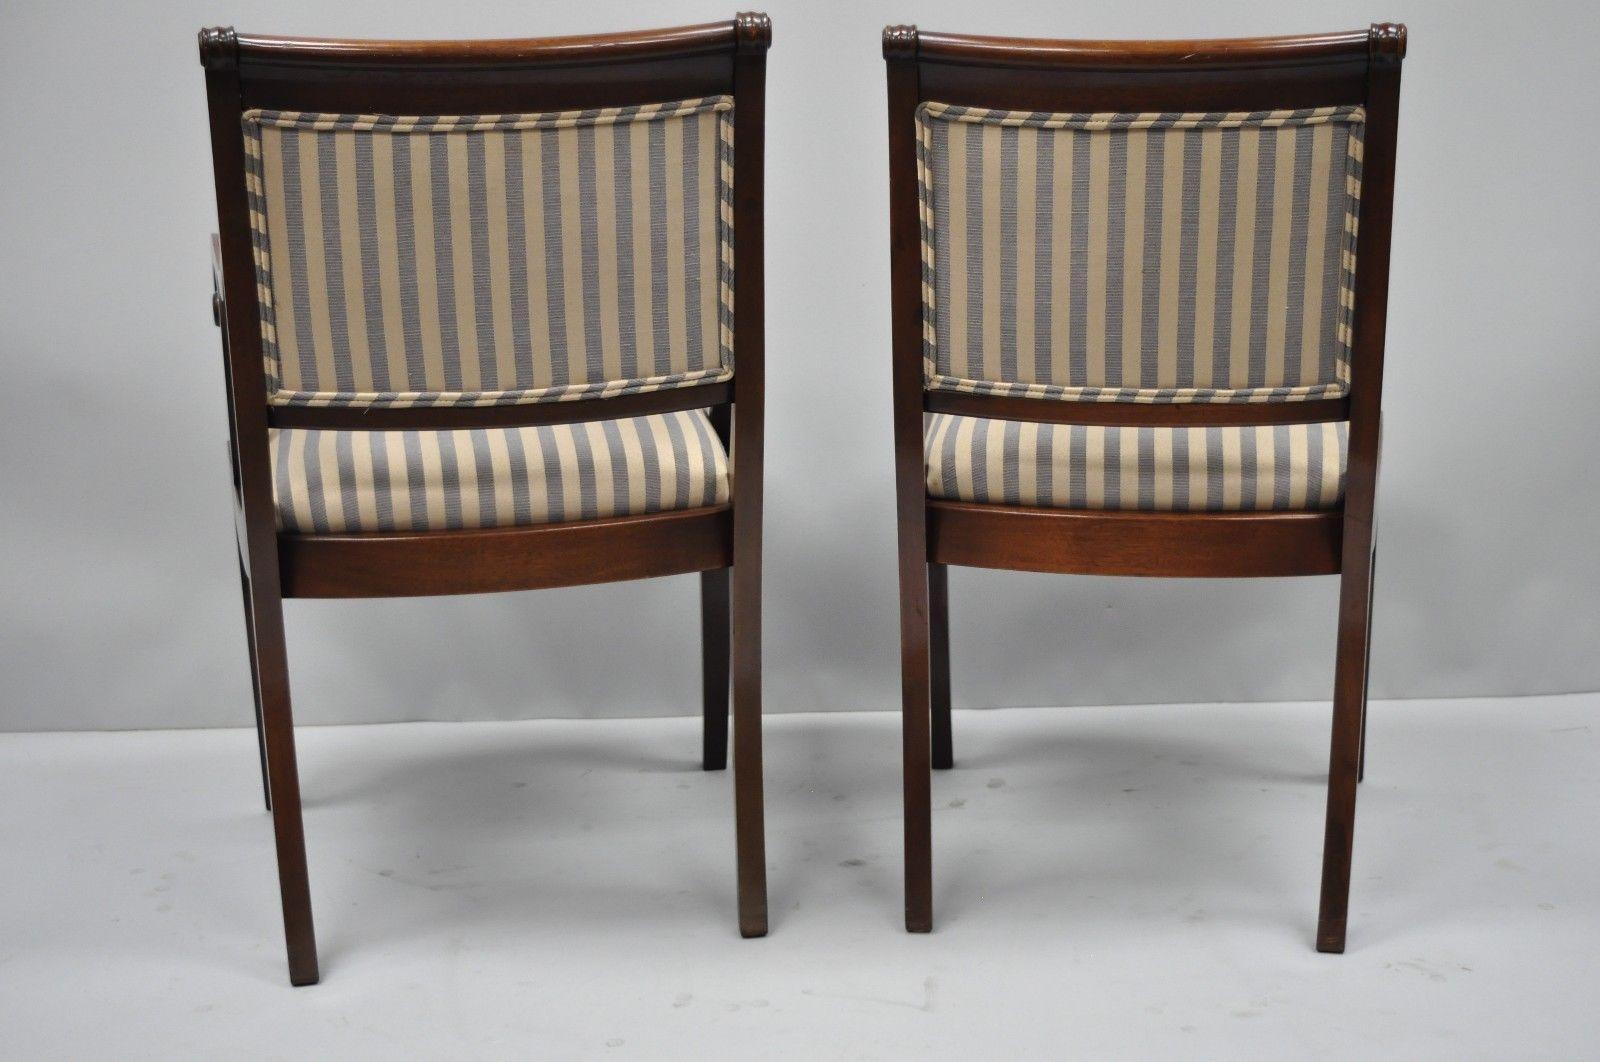 Mahogany Saber Leg Regency Style Upholstered Dining Room Chairs Set of Six 1